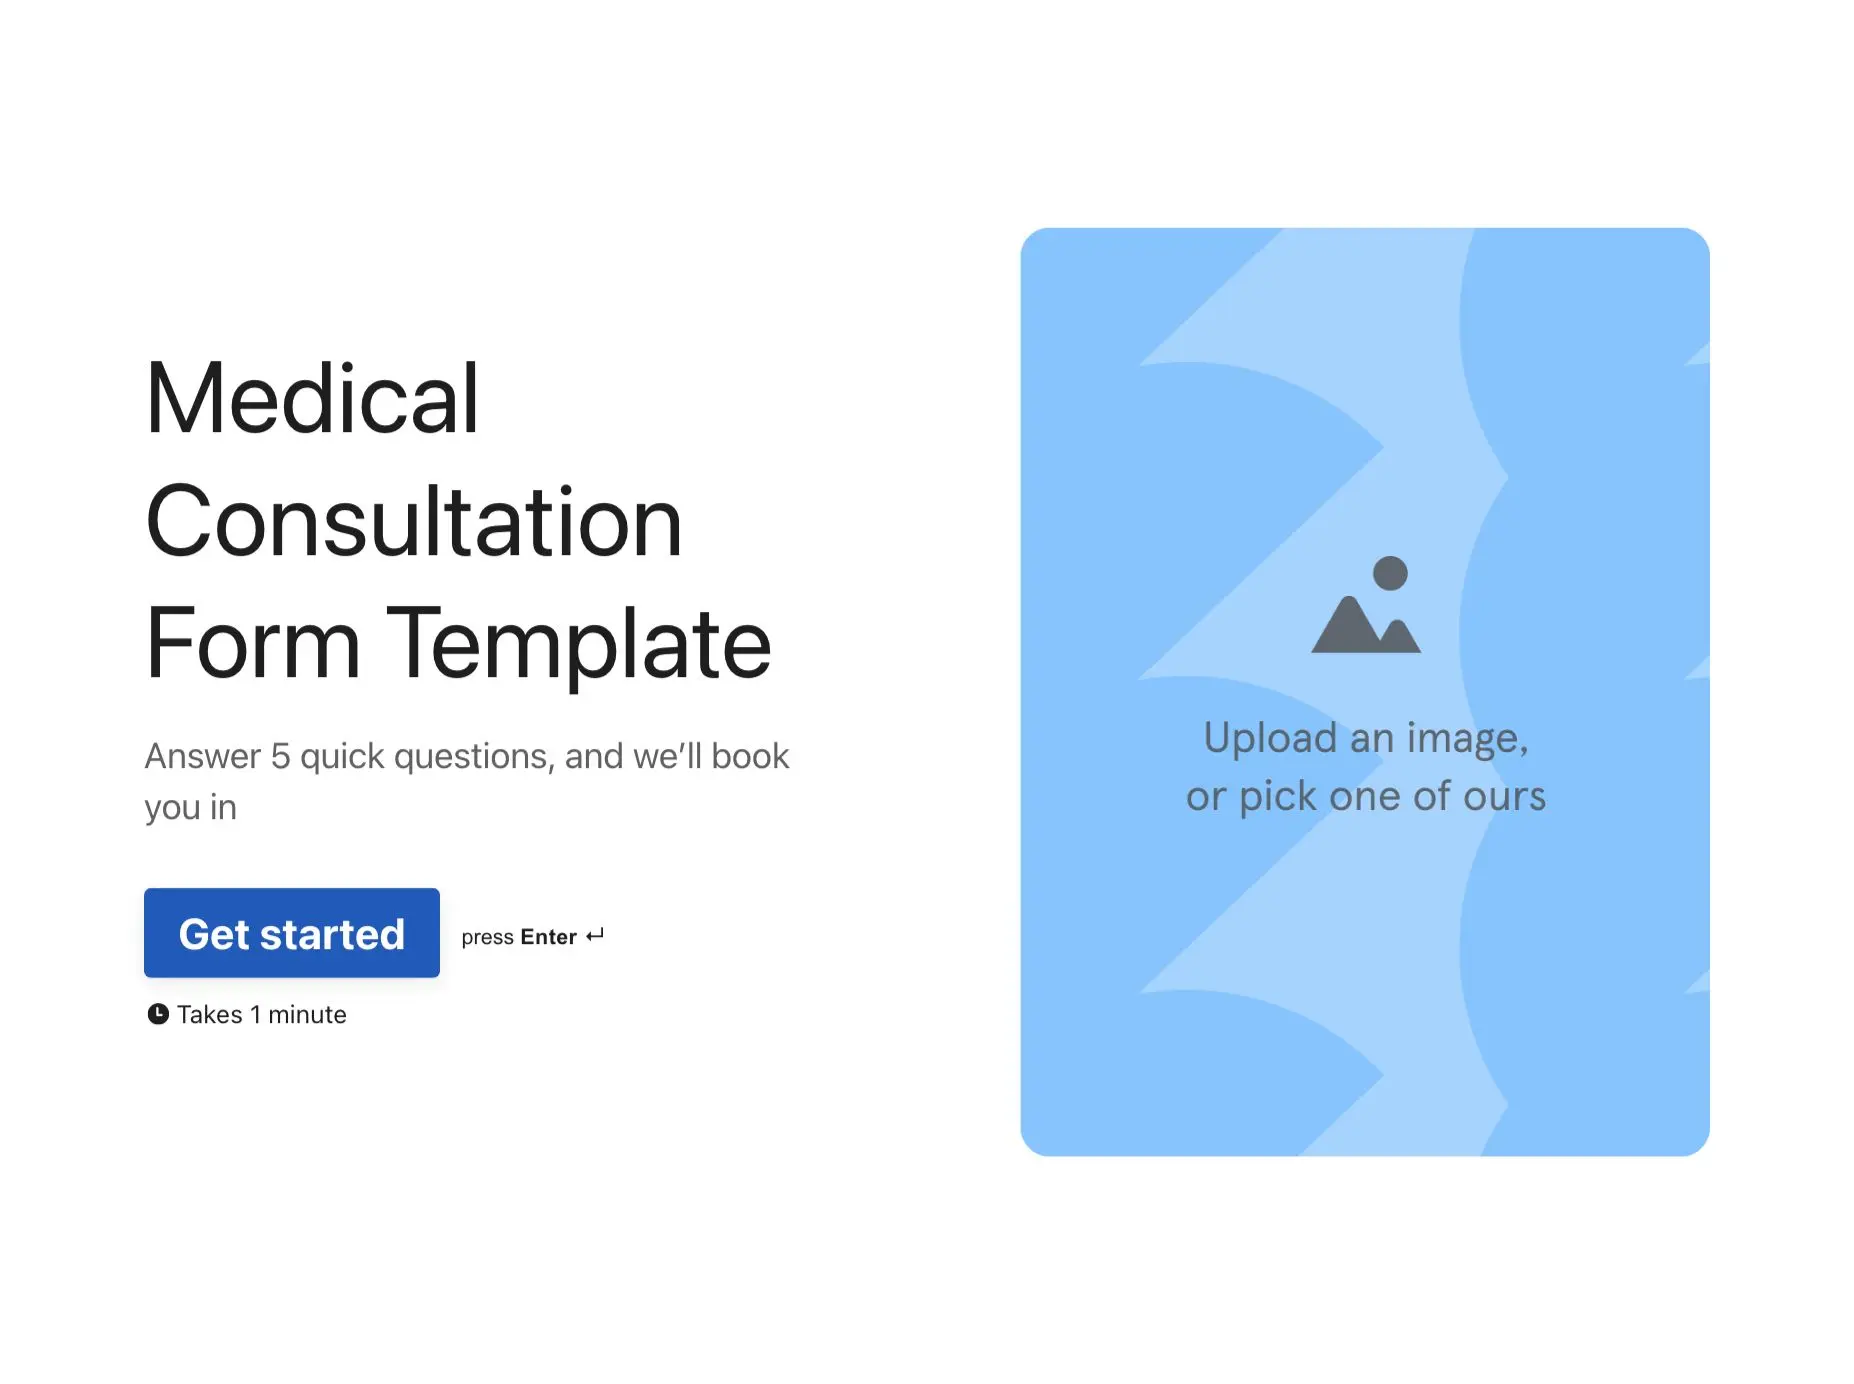 Medical Consultation Form Template Hero